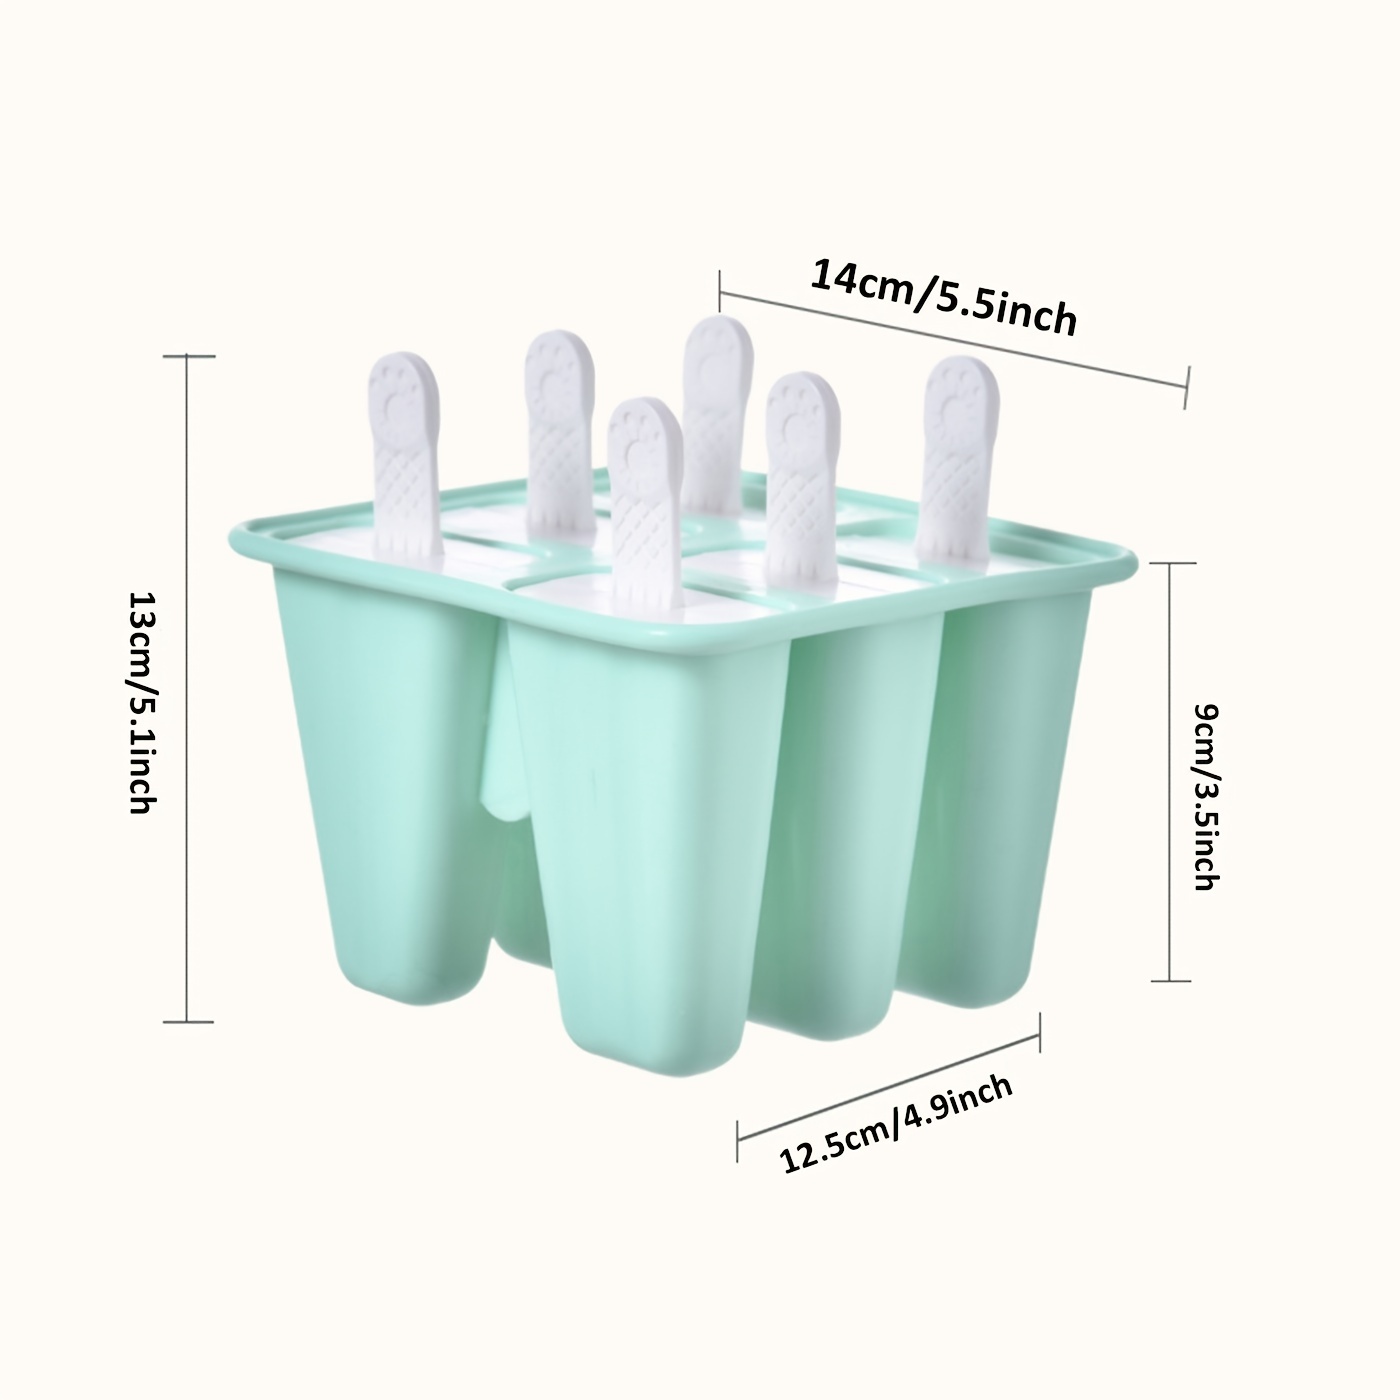 Silicone Popsicle Molds, 6 Pieces Ice Pop Molds, BPA Free Popsicle